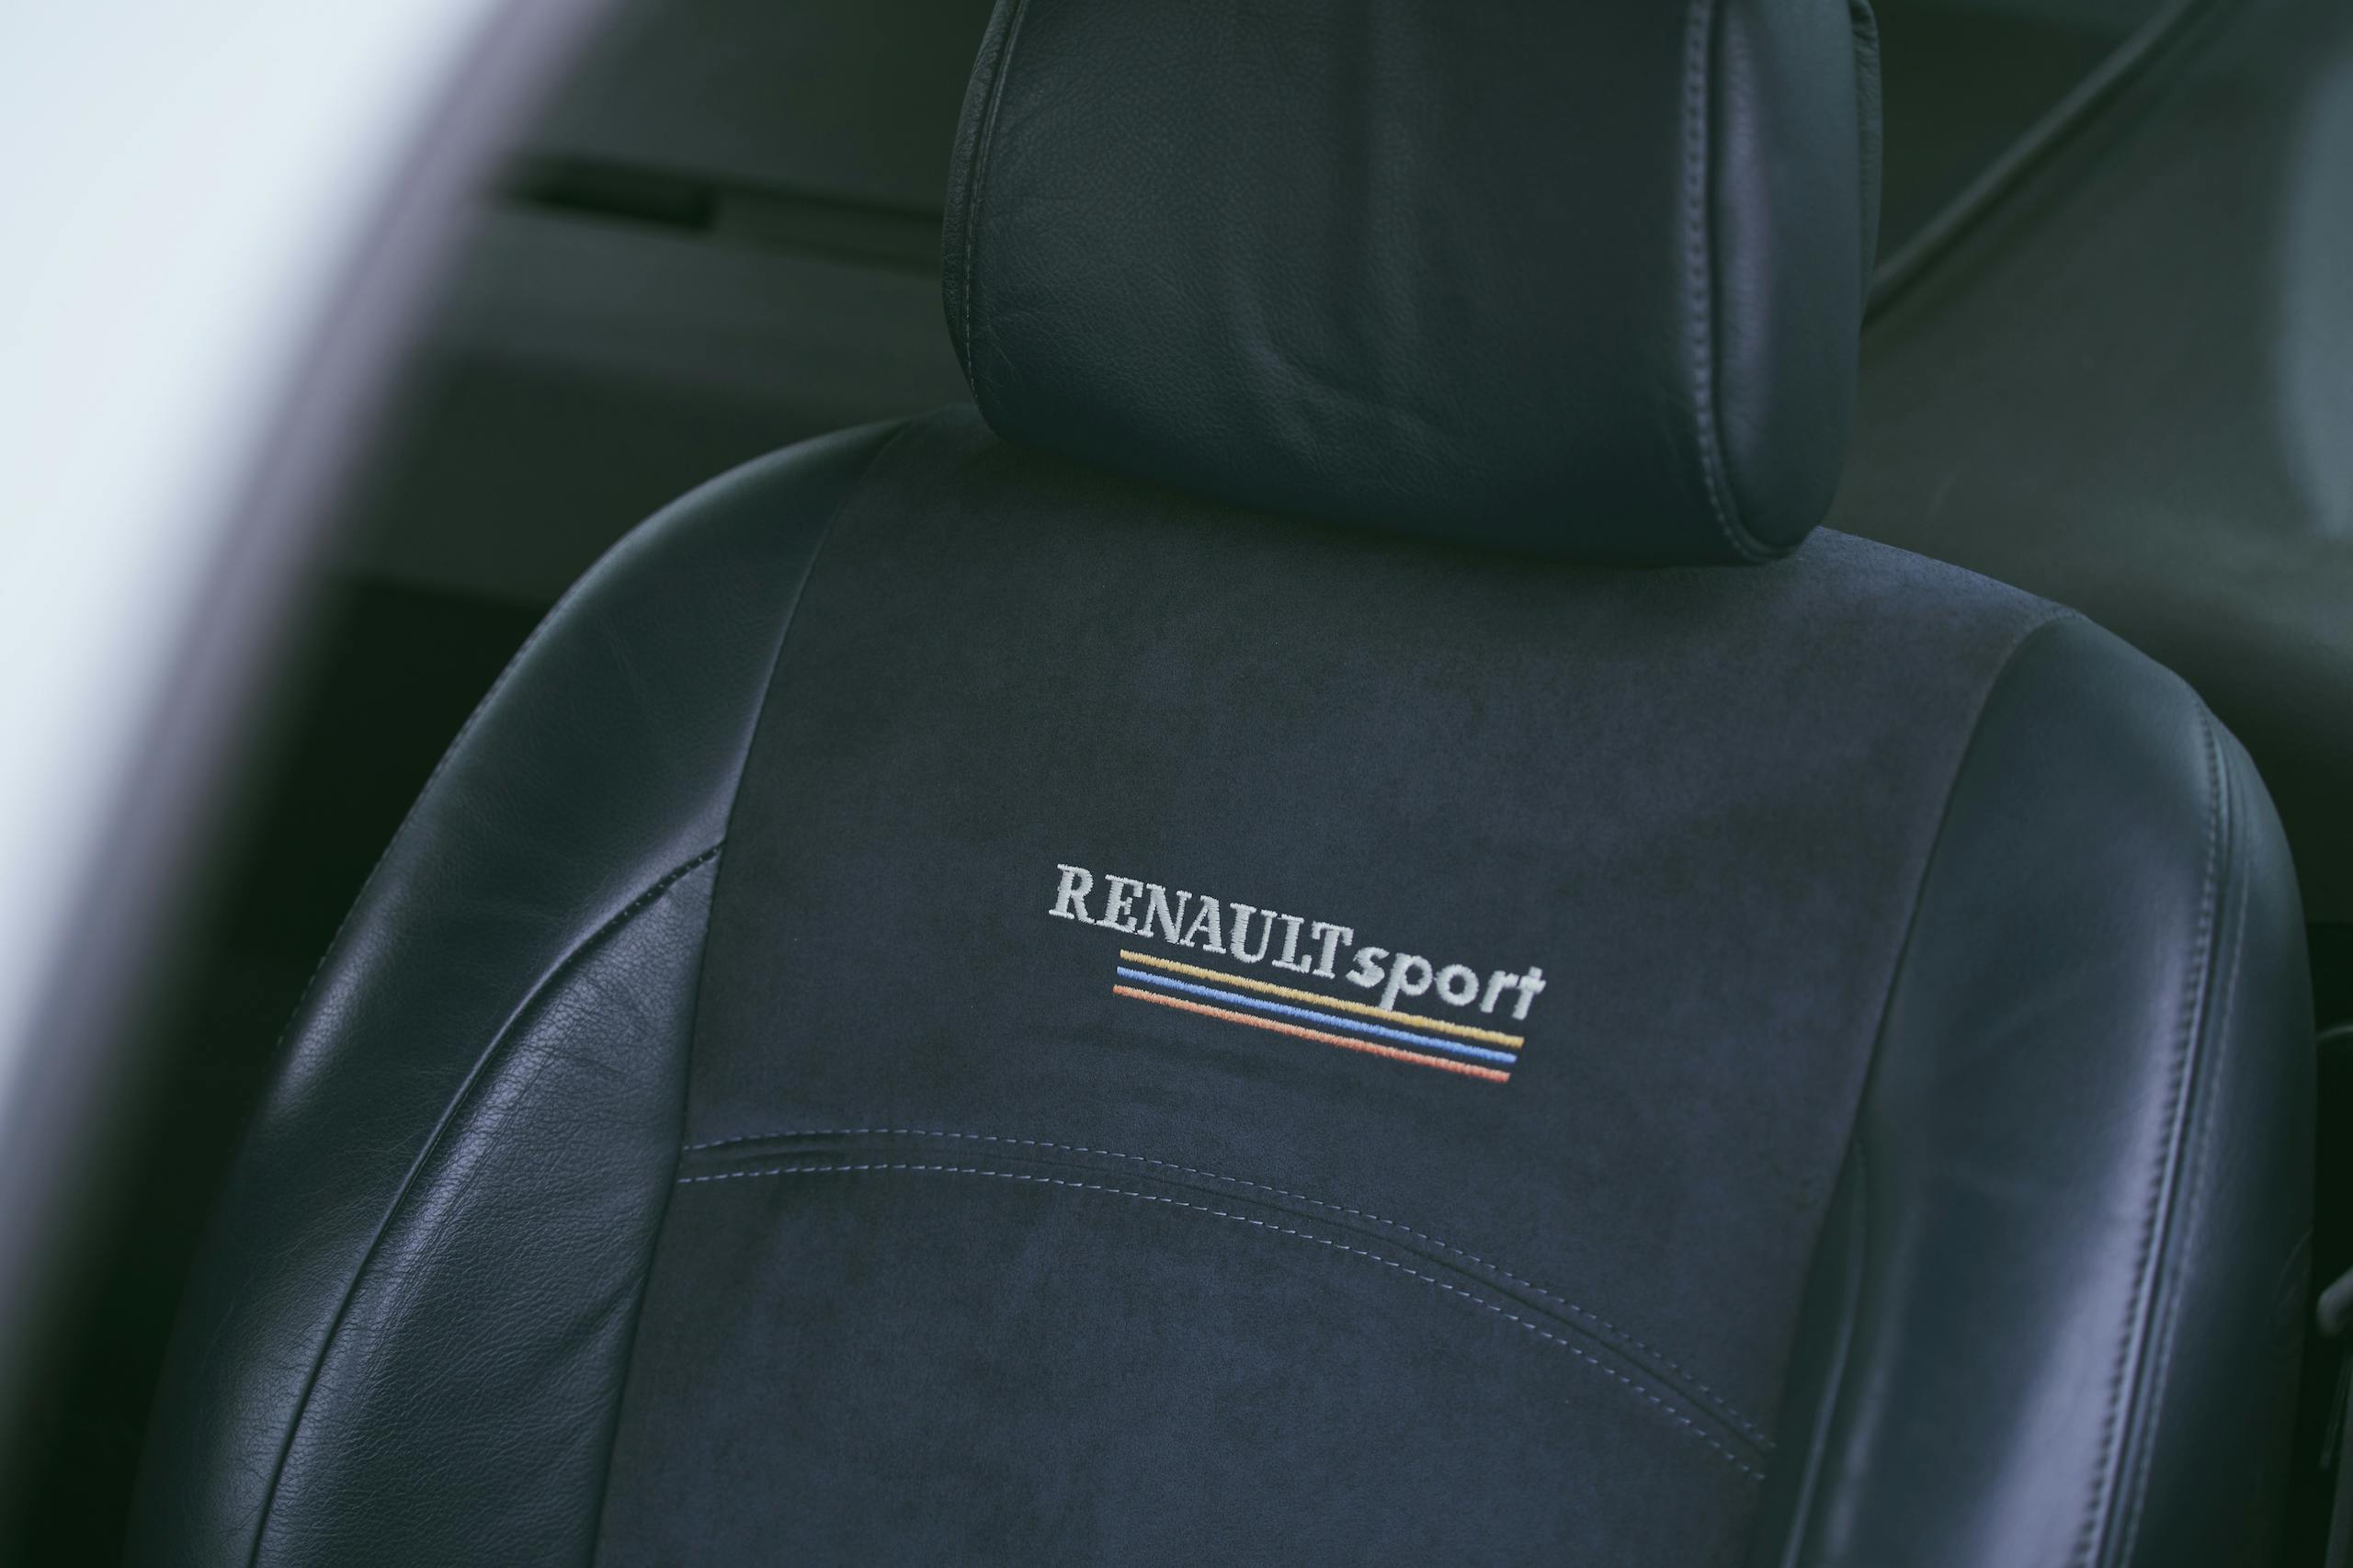 2002 Renault Clio V6 interior seat embroidery detail